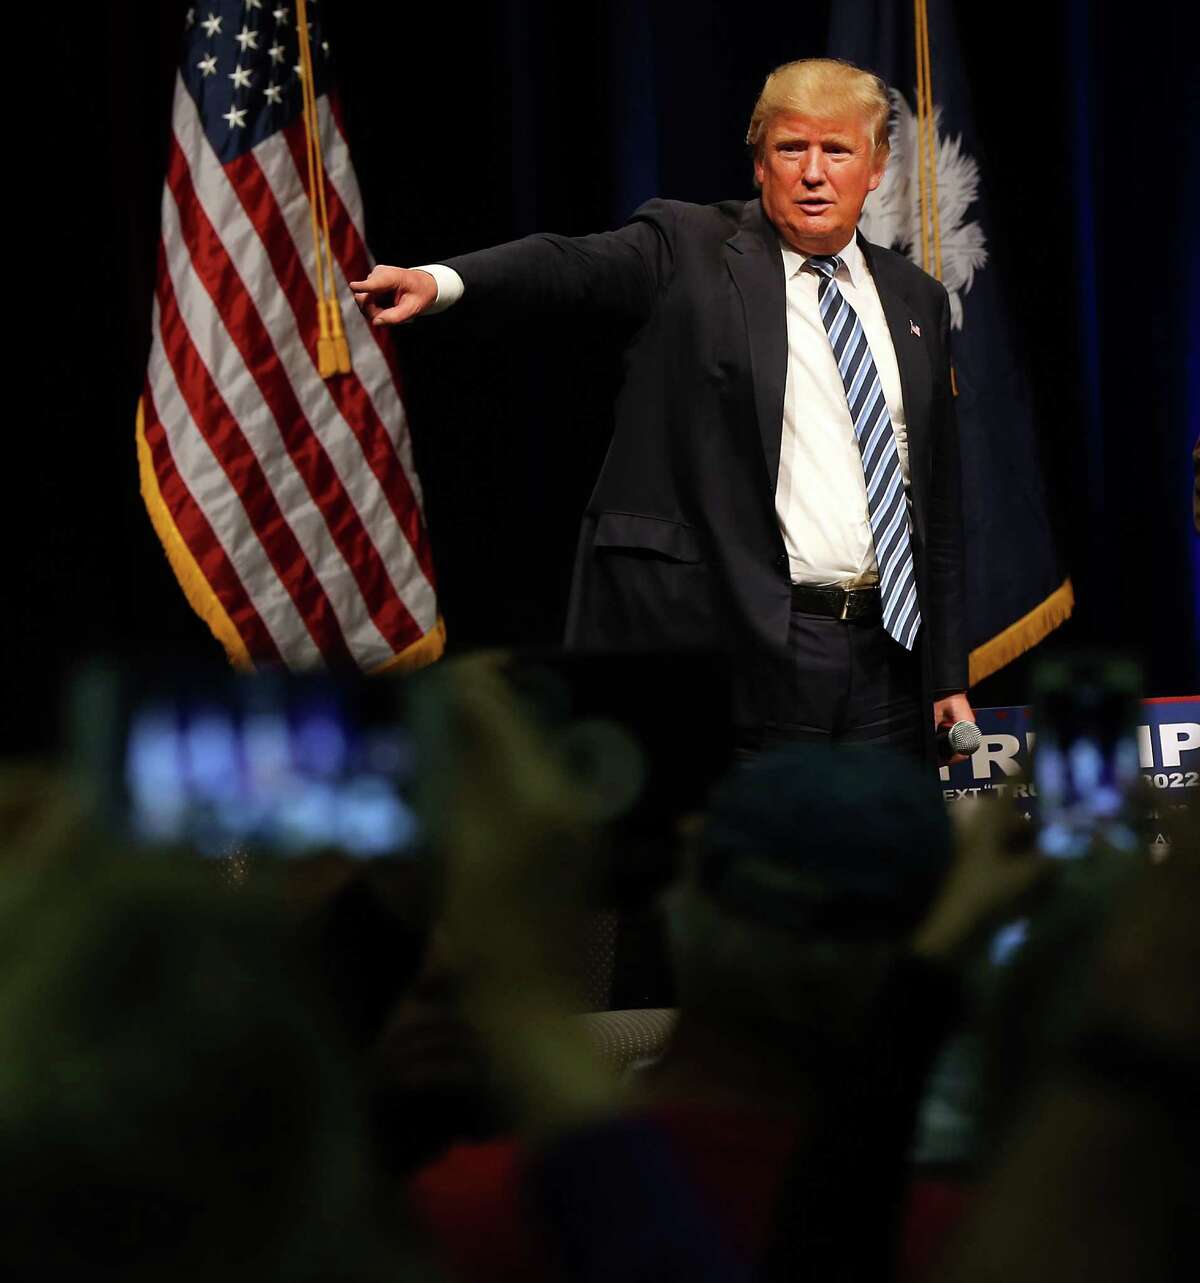 Donald Trump has scored his highest numbers in a Quinnipiac University poll released on Wednesday, Feb. 17, 2016 that found him with a 2-1 lead among Republican voters nationwide, with 39 percent. He’s followed by Sen. Marco Rubio of Florida with 19 percent and Sen. Ted Cruz of Texas with 18 percent, according to a Quinnipiac University National poll released today. Ohio Gov. John Kasich has 6 percent with former Florida Gov. Jeb Bush and Dr. Ben Carson at 4 percent each. Nine percent are undecided.